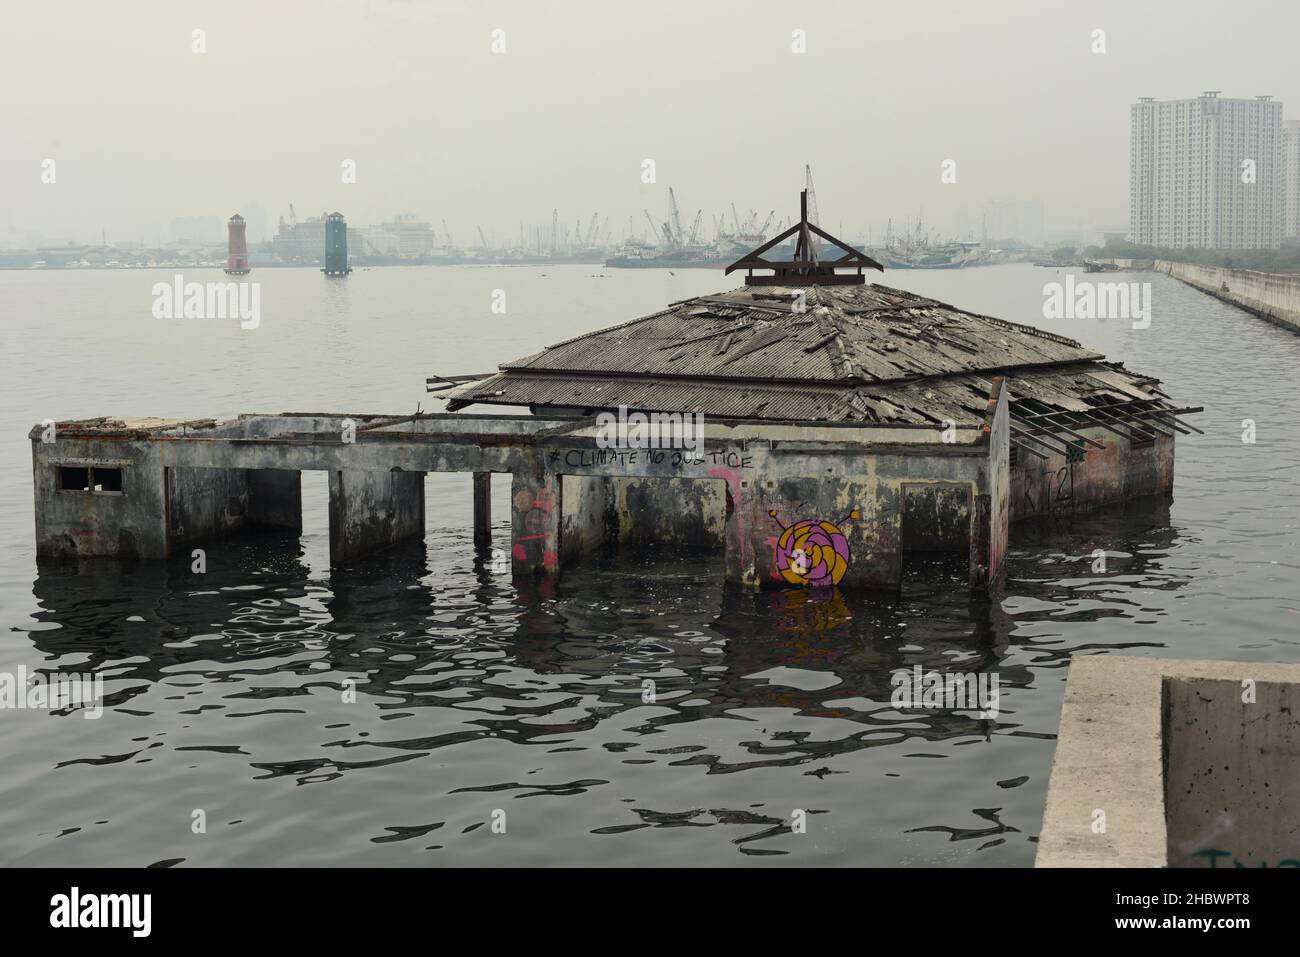 A mosque building that has been abandoned for decades due to sea level rise, coastal abrasion and land subsidence on the coastal area of Jakarta, Indonesia. Stock Photo